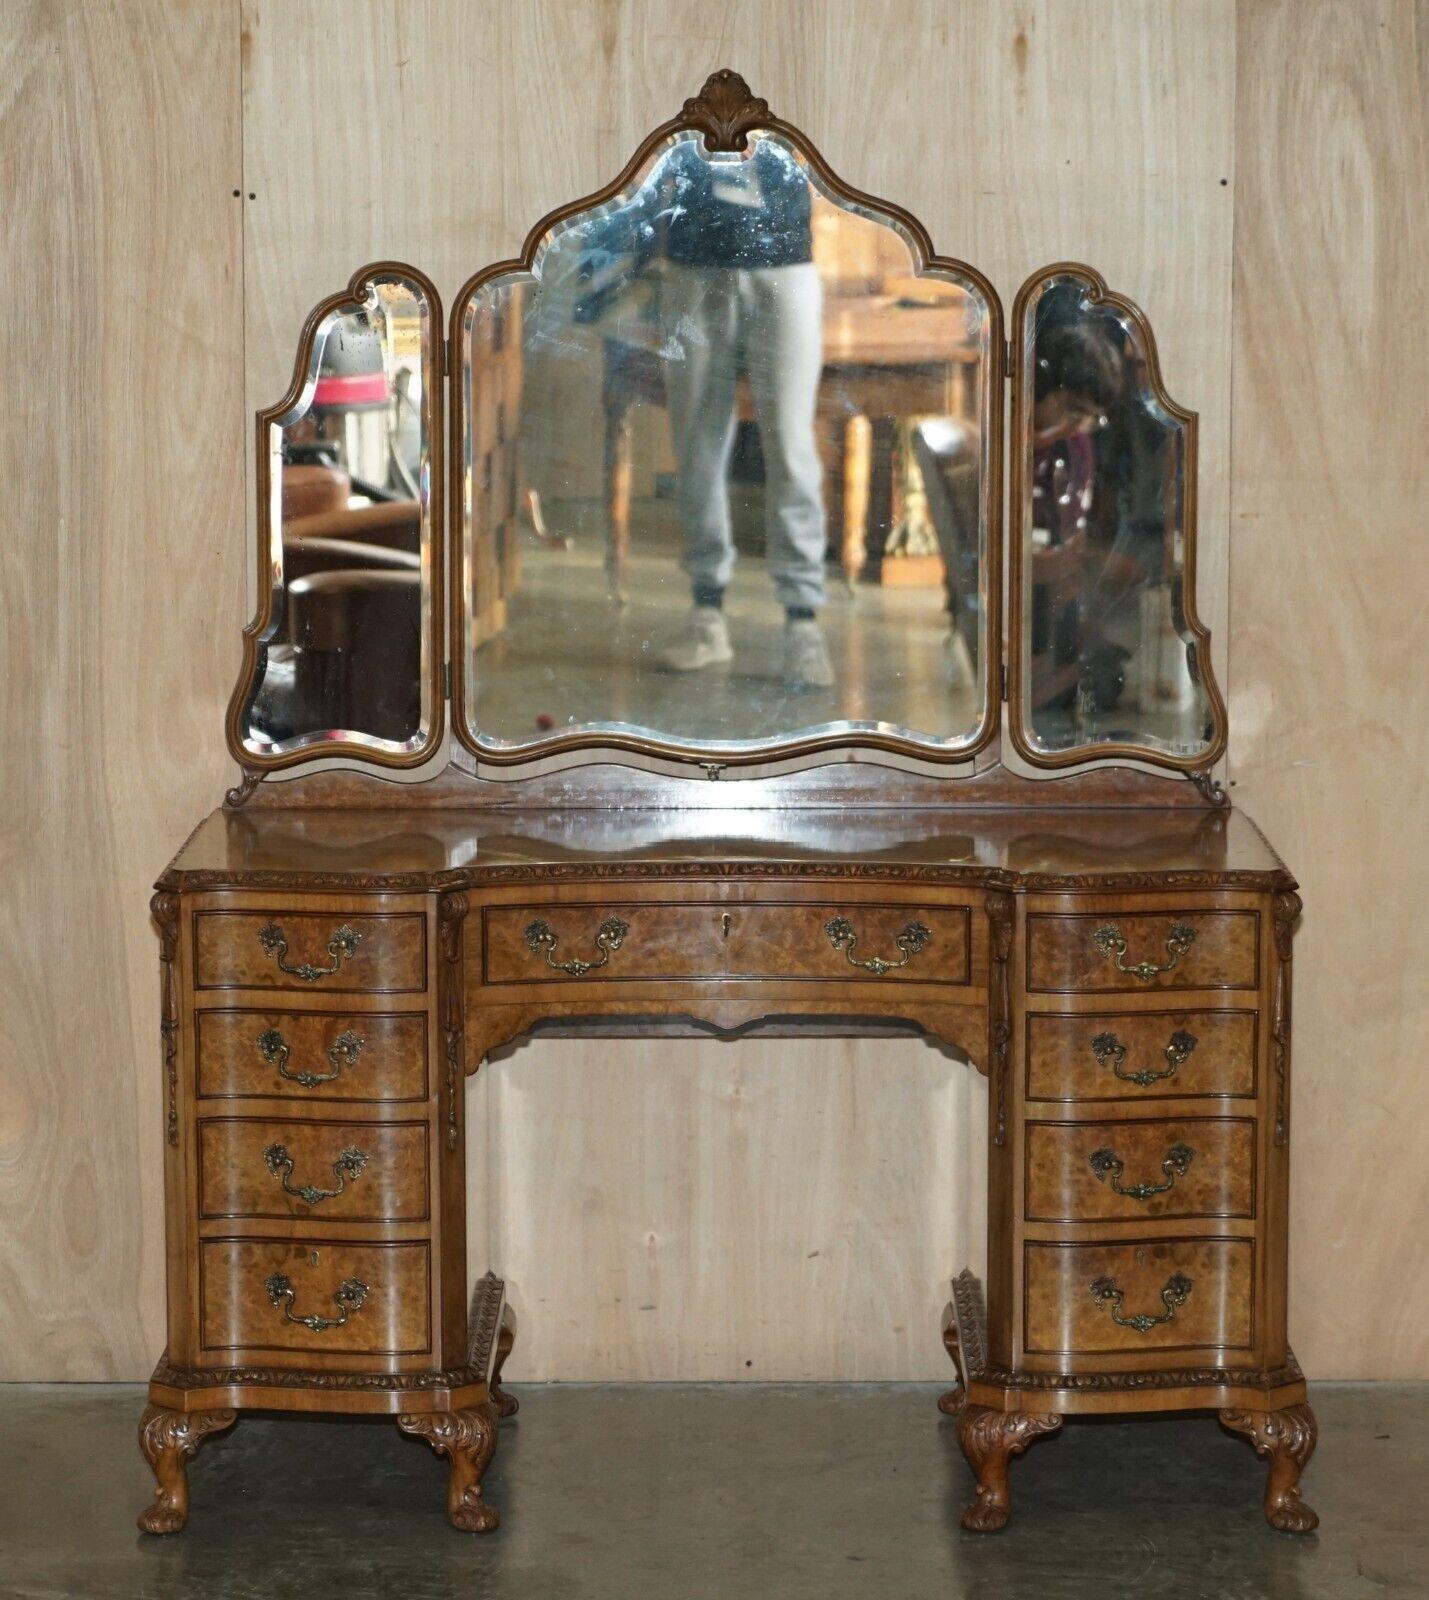 We are delighted to offer for sale this finest quality, hand carved Burr Walnut dressing table with tri folding mirrors 

This dressing table is part of a large bedroom set, I have in total a pair of wardrobes, a dressing table with trifold mirrors